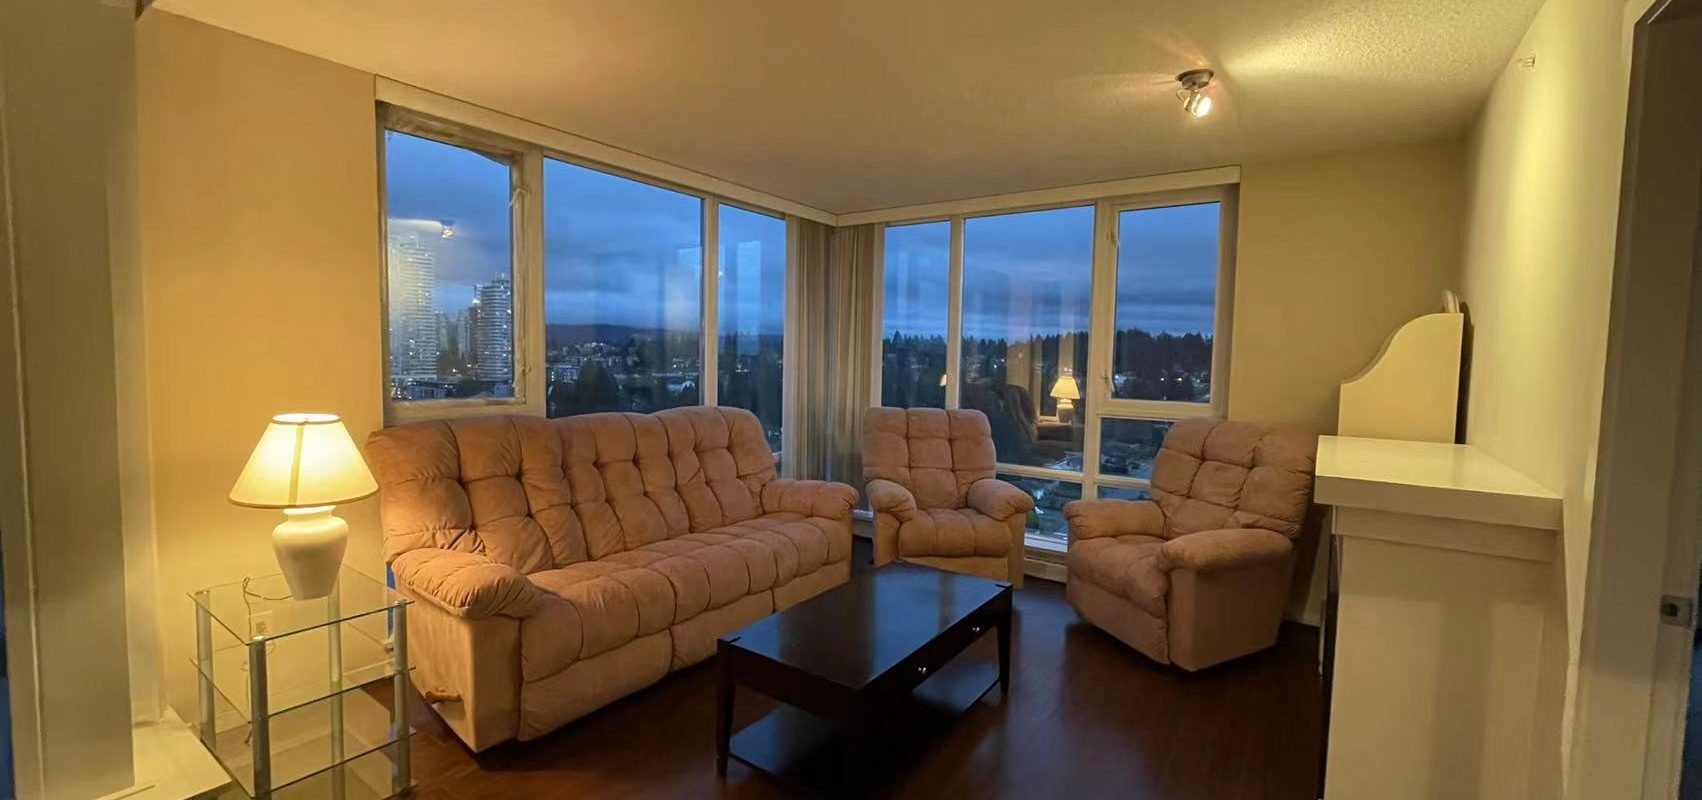 Burnaby North-East Corner unit Providing Picturesque Mountain View